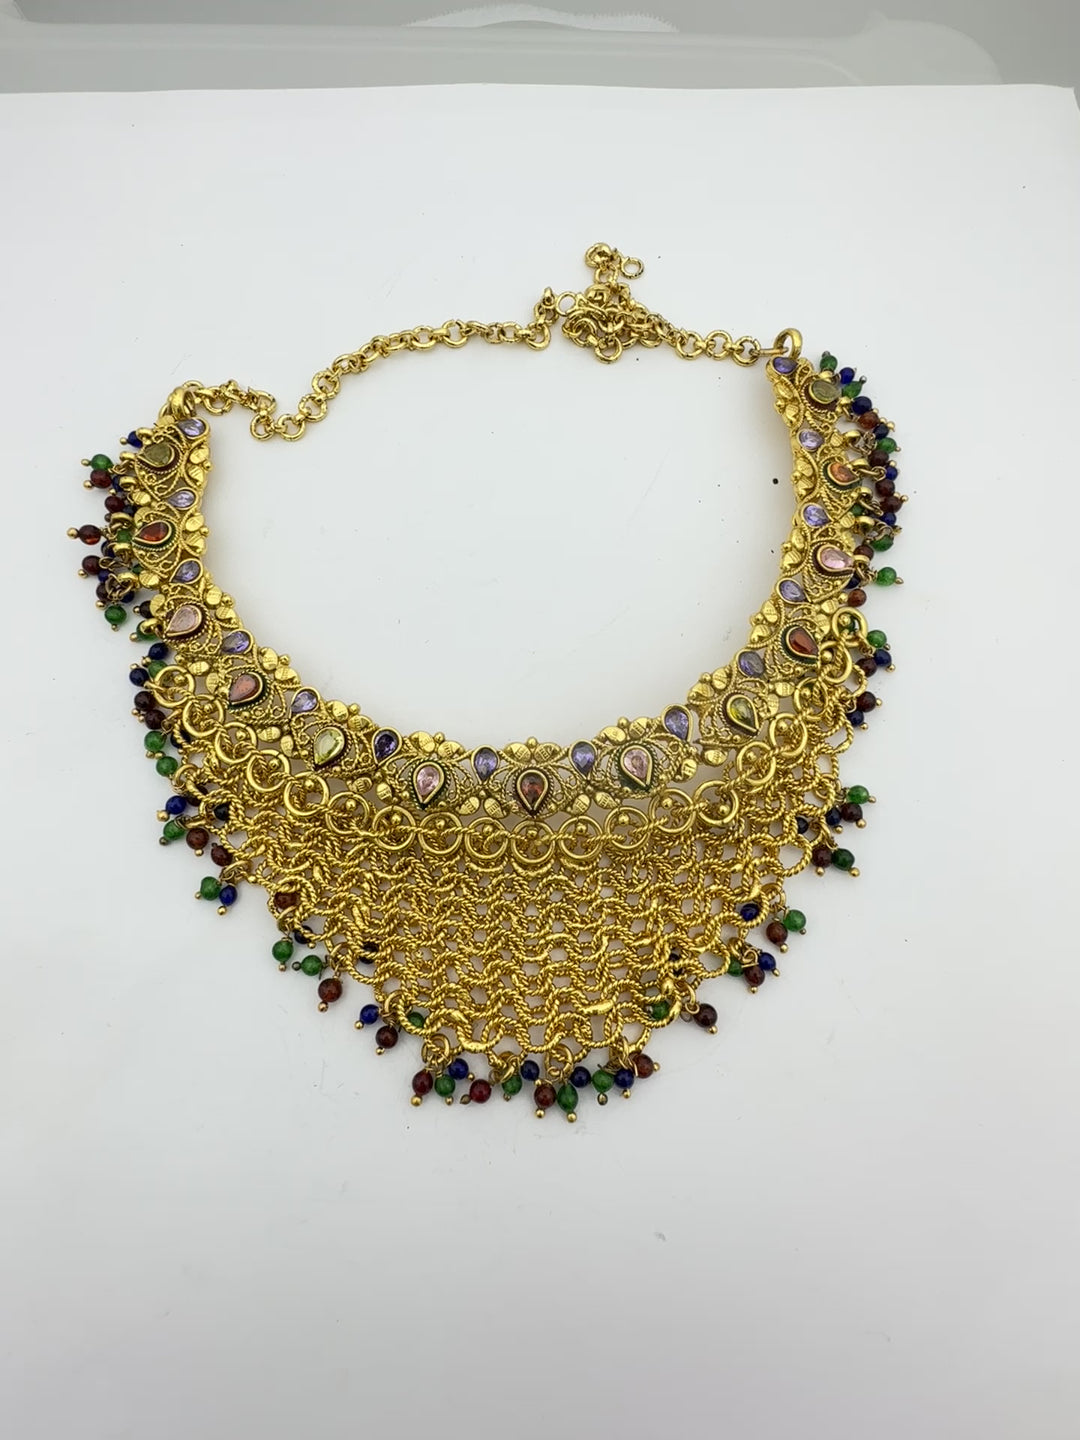 Egyptian Mesh, Jeweled Gem Colored Necklace 24kt Electroplated